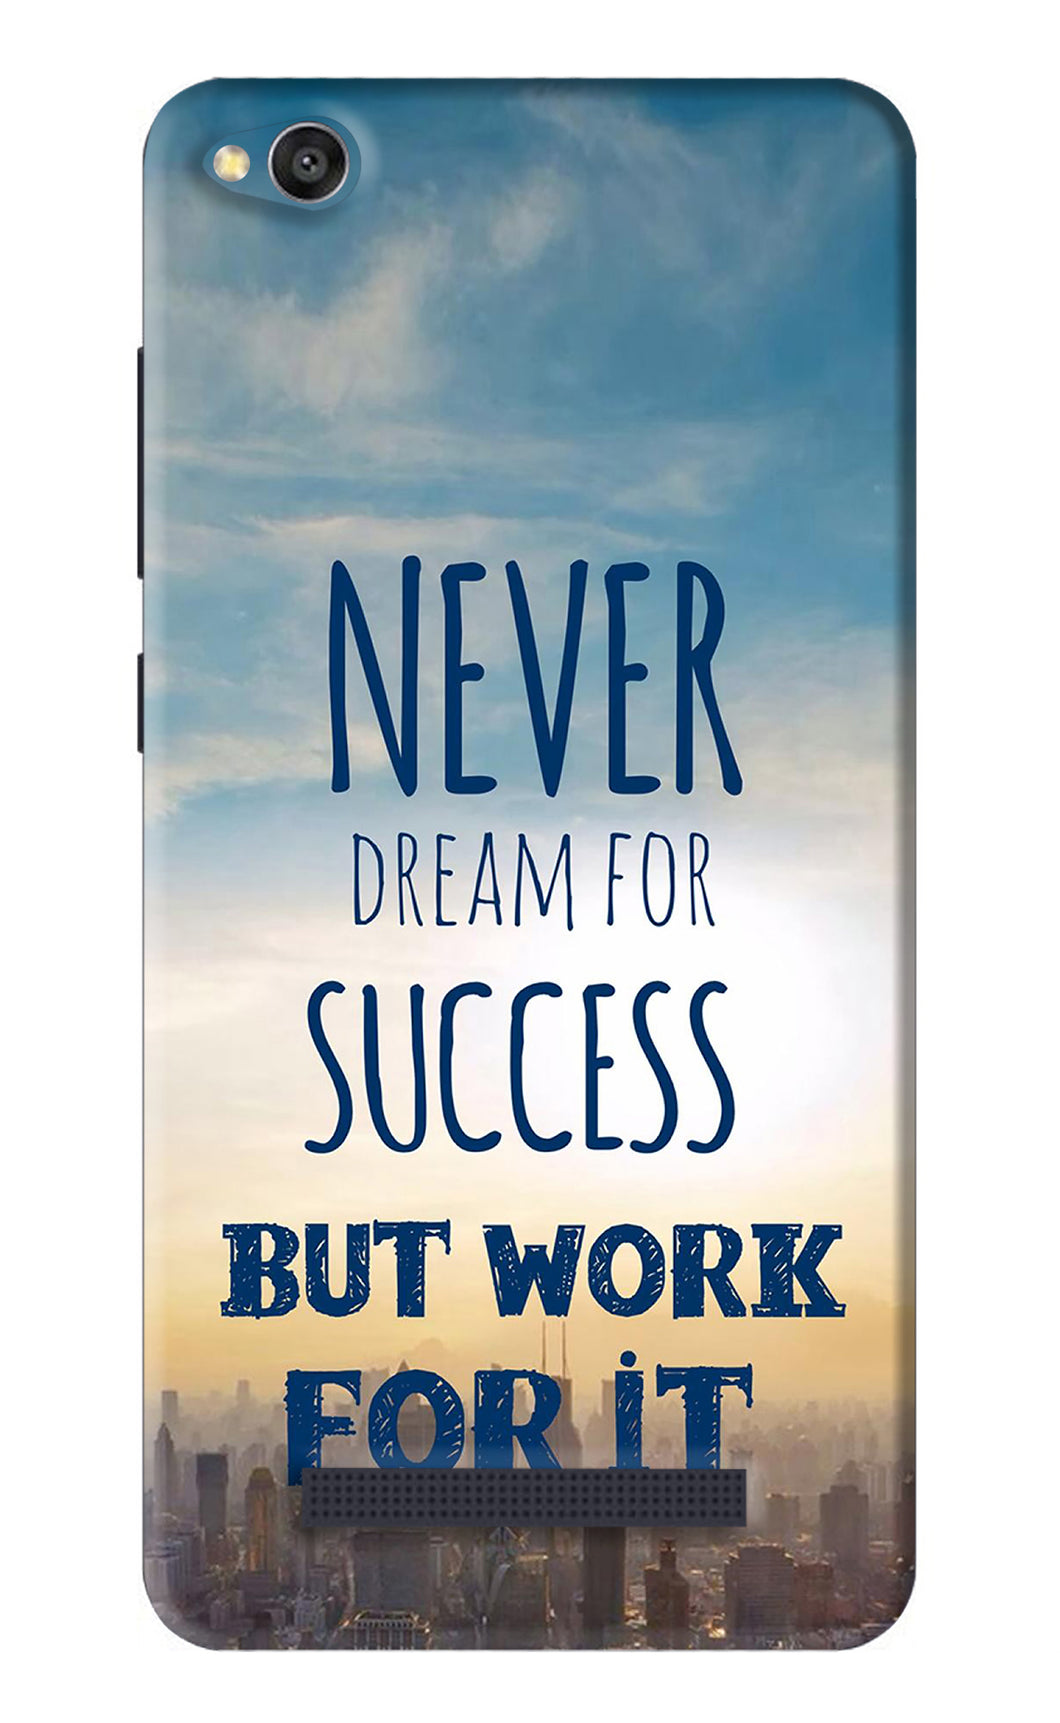 Never Dream For Success But Work For It Xiaomi Redmi 4A Back Skin Wrap